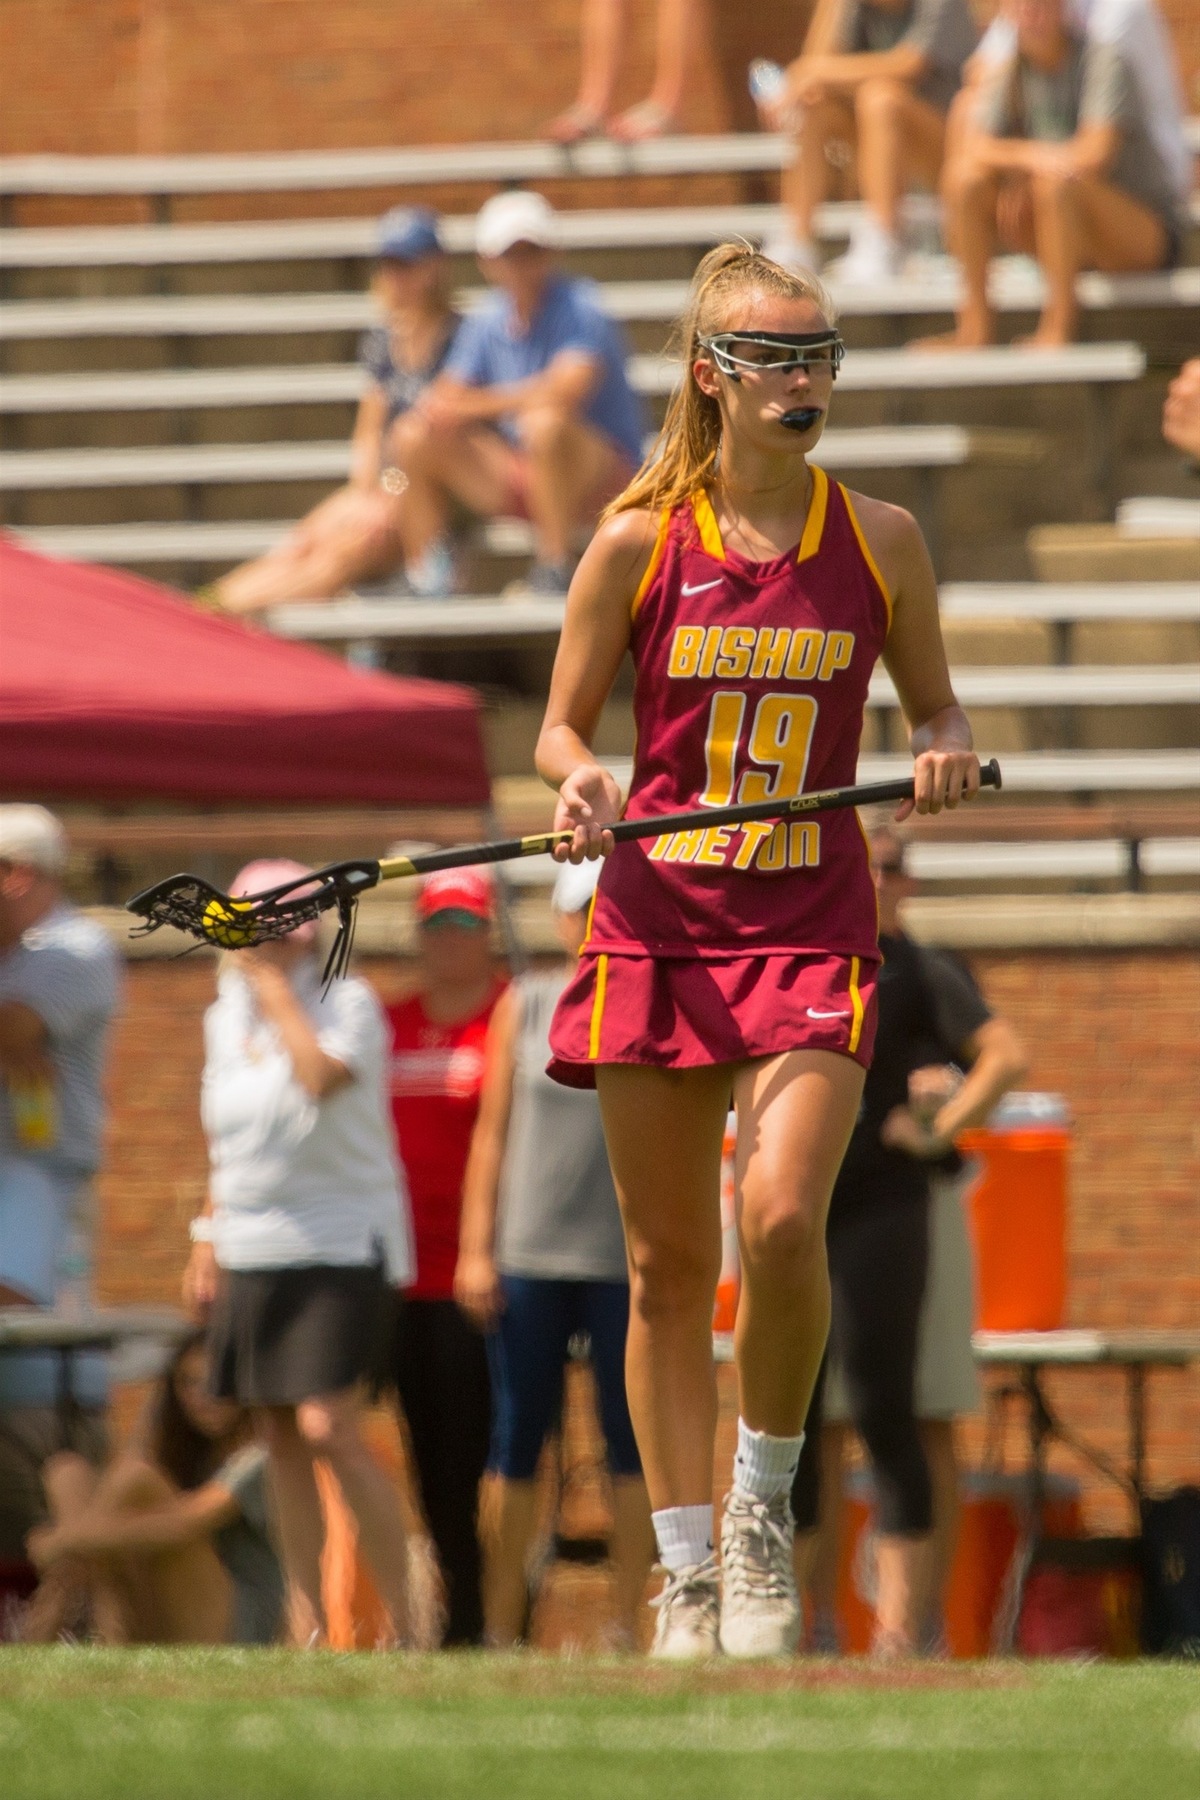 Bishop Ireton Senior and UNC commit, Briana Lantuh, is the 2019 Girl's Lacrosse Player of the Year.